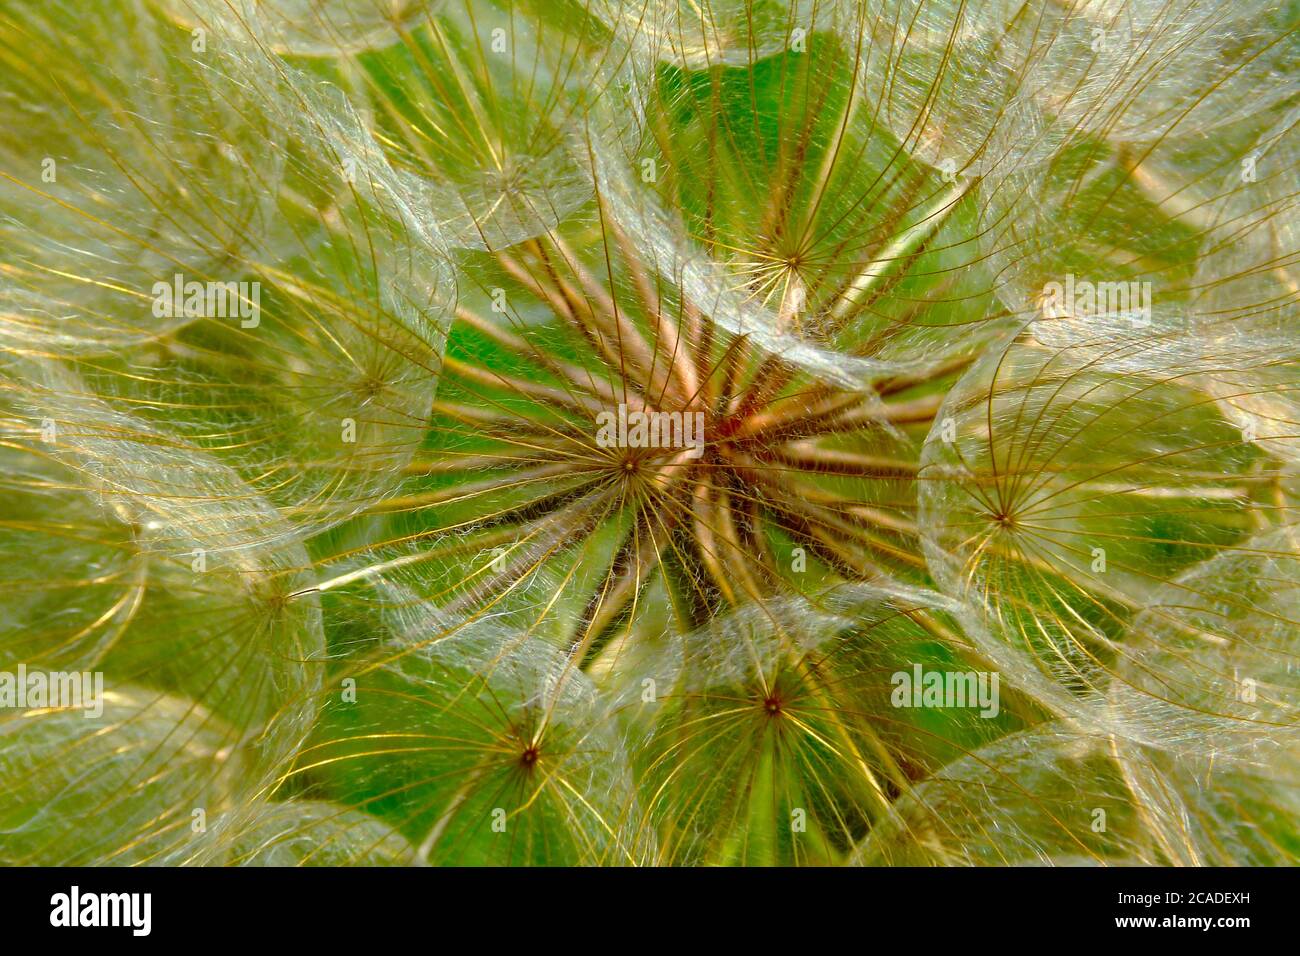 macro detail of fluffy white and red common dandelion with sift bright green background. closeup view. botanical name Taraxacum erythrospermum Stock Photo